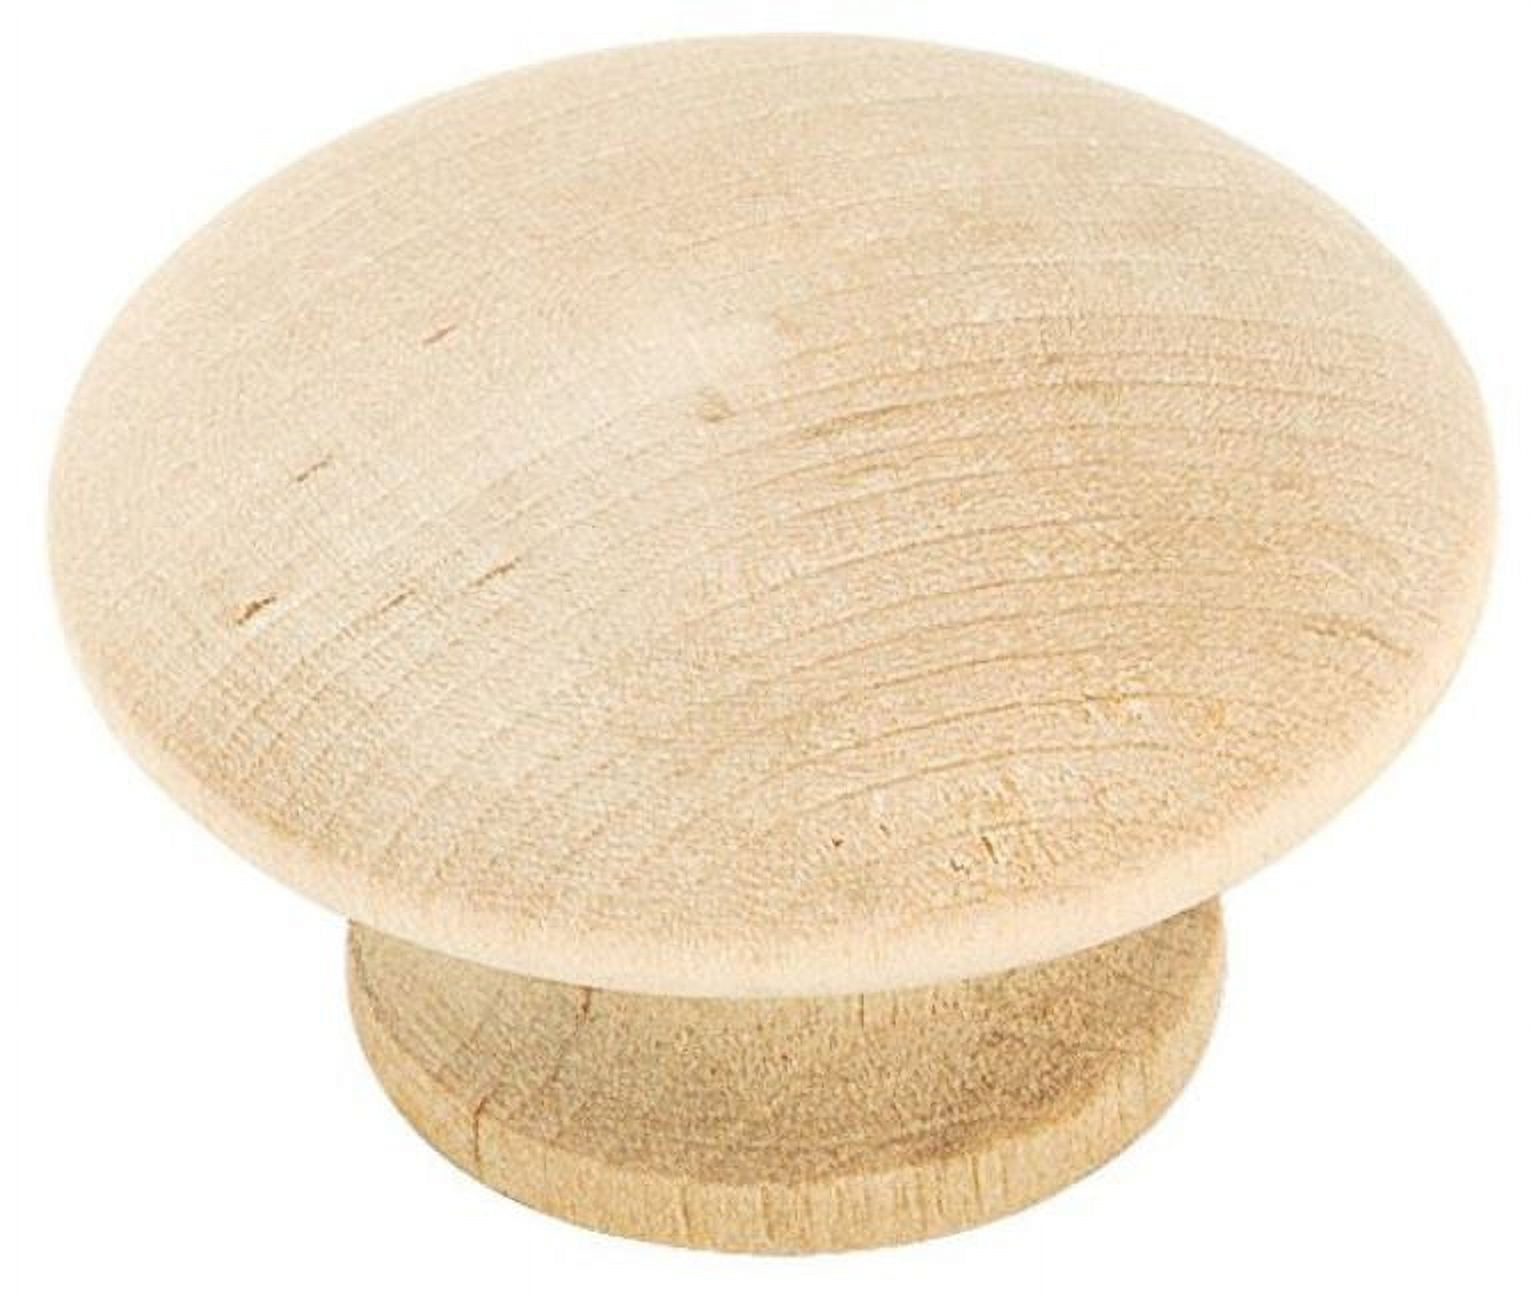 Bp813wd 1.5 In. Plain Knob, Wood Round - Pack Of 2